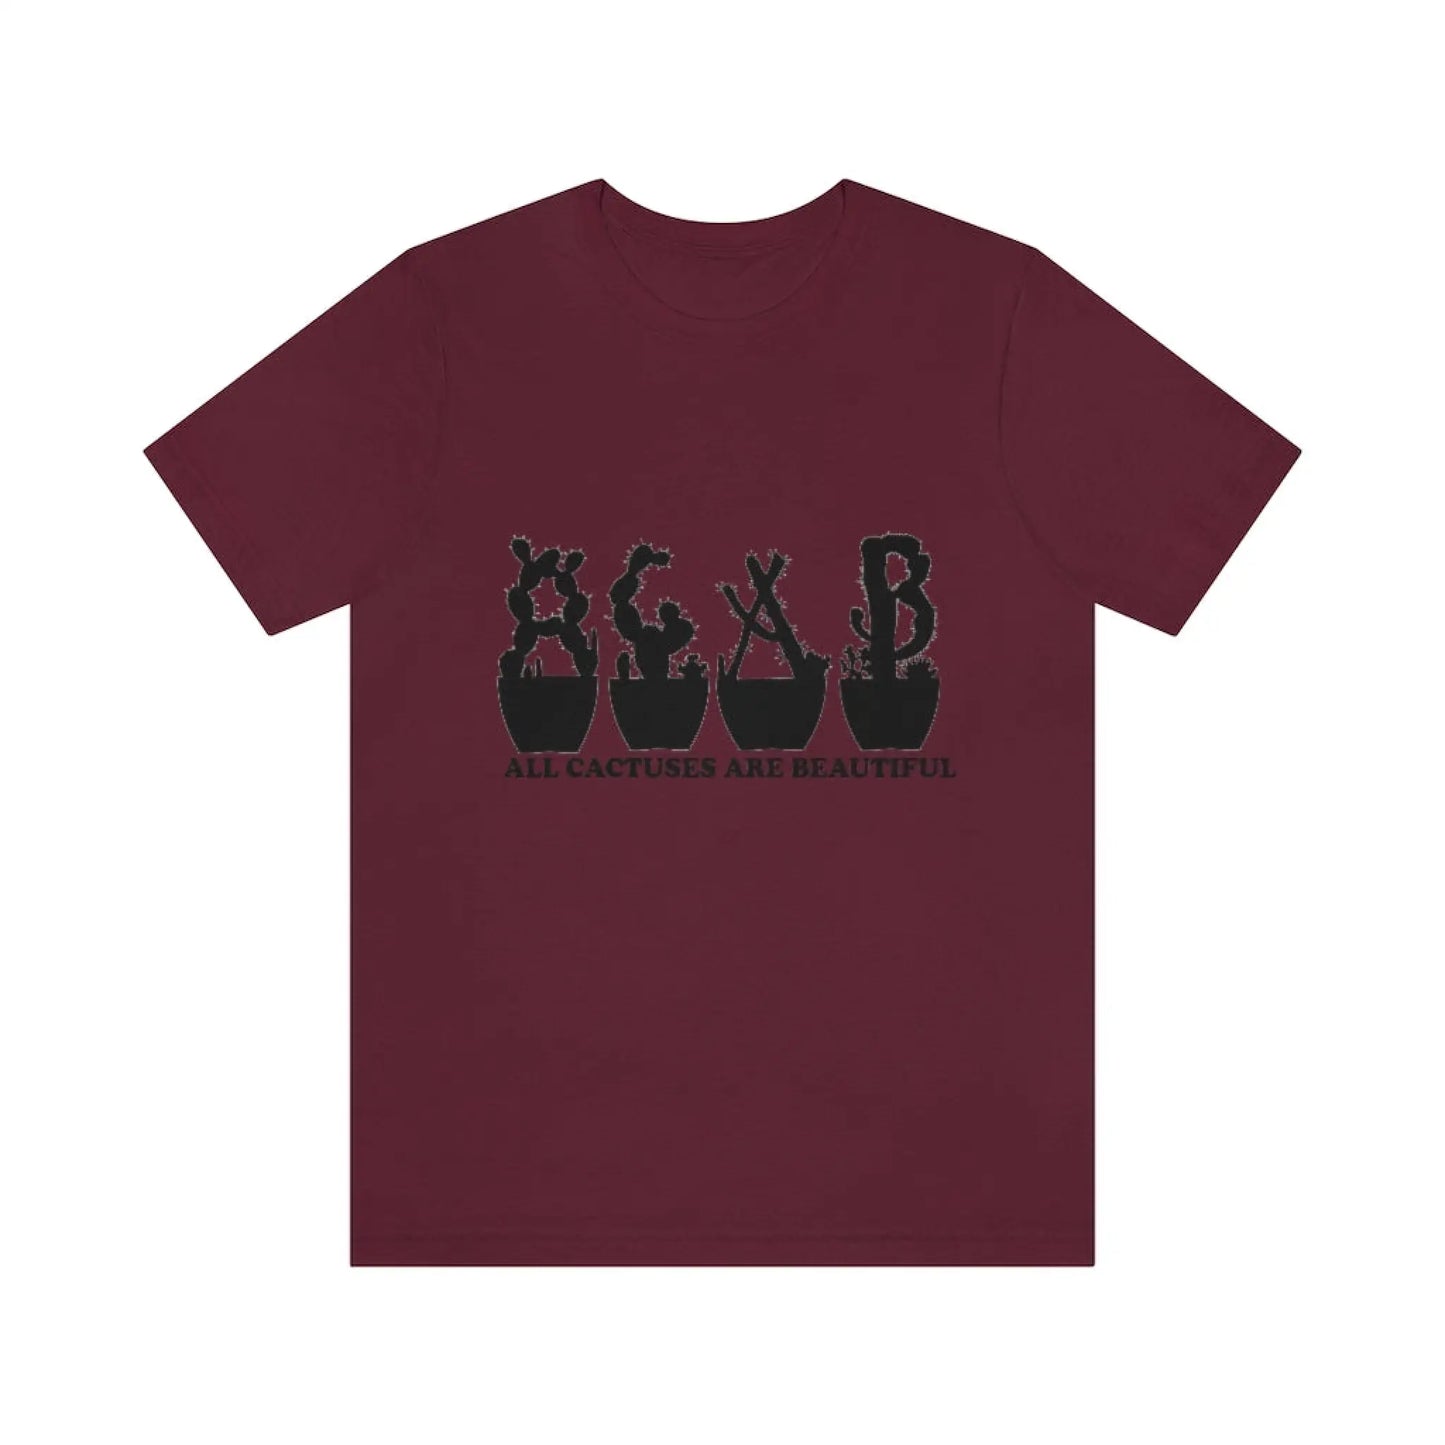 Shirts - All Cactuses Are Beautiful - Maroon / S - T-Shirt